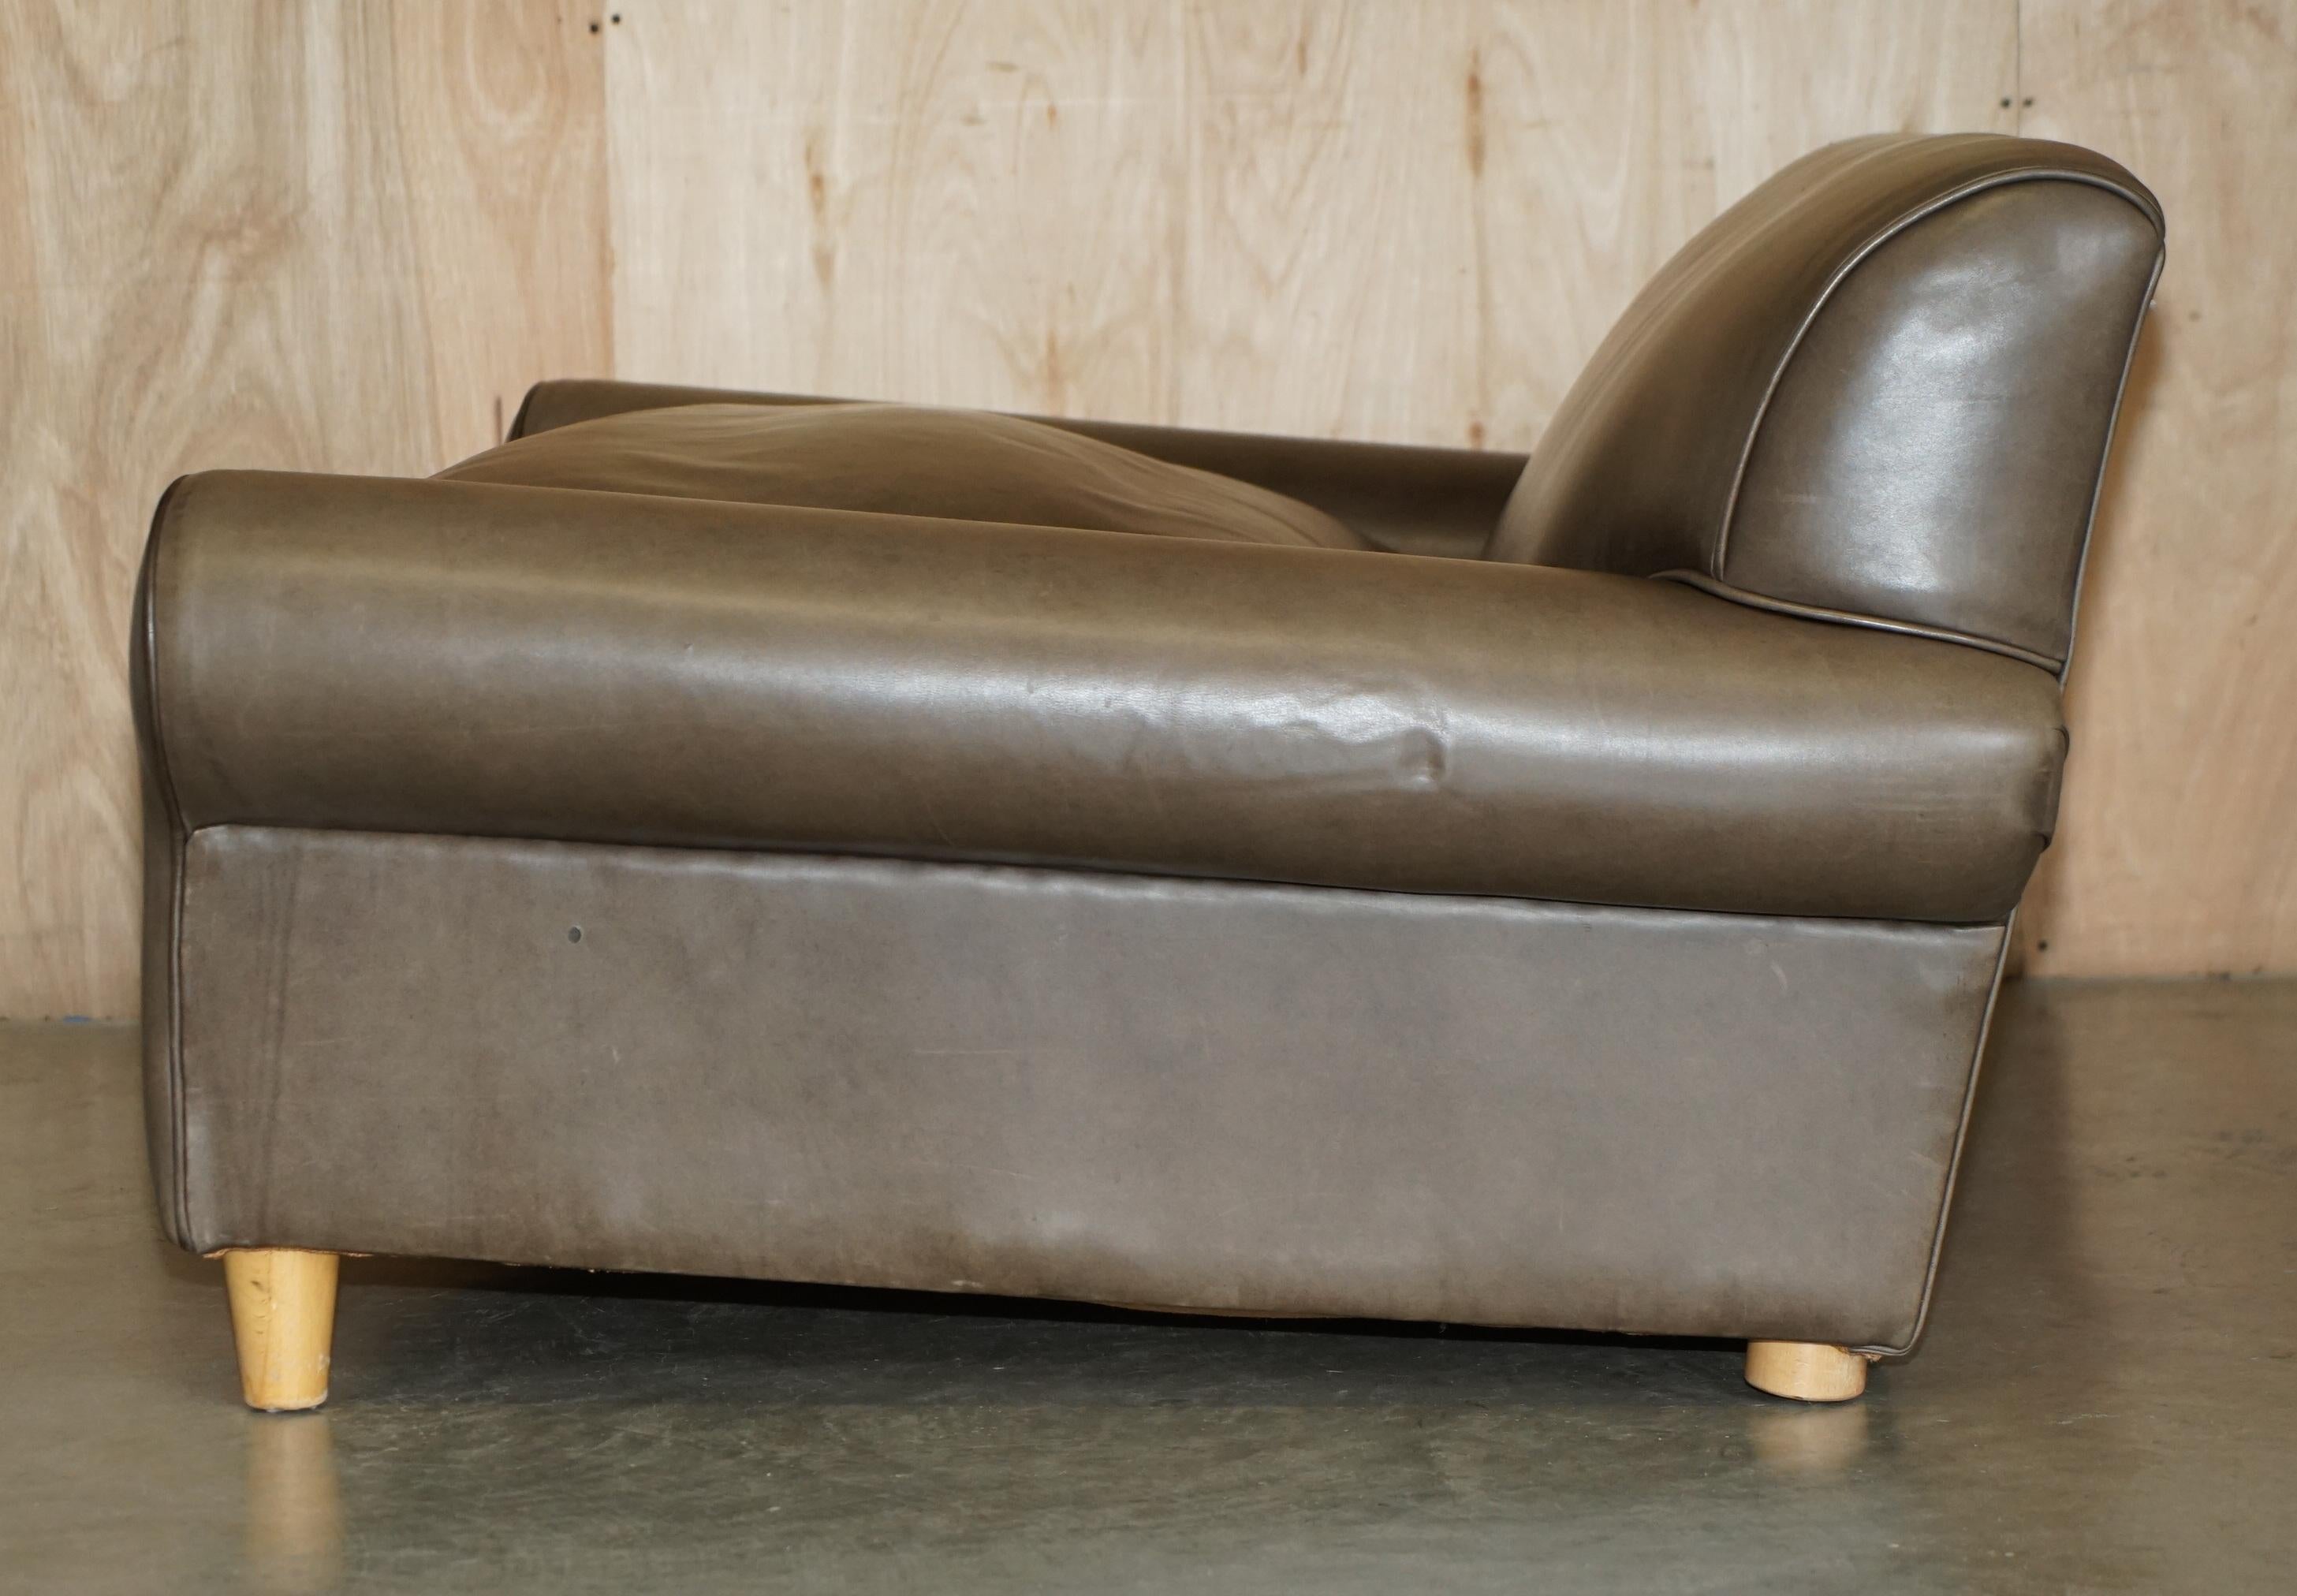 STUNNING TERENCE CONRAN GREY LEATHER LARGE LOVESEAT ARMCHAiR SOFA en vente 7